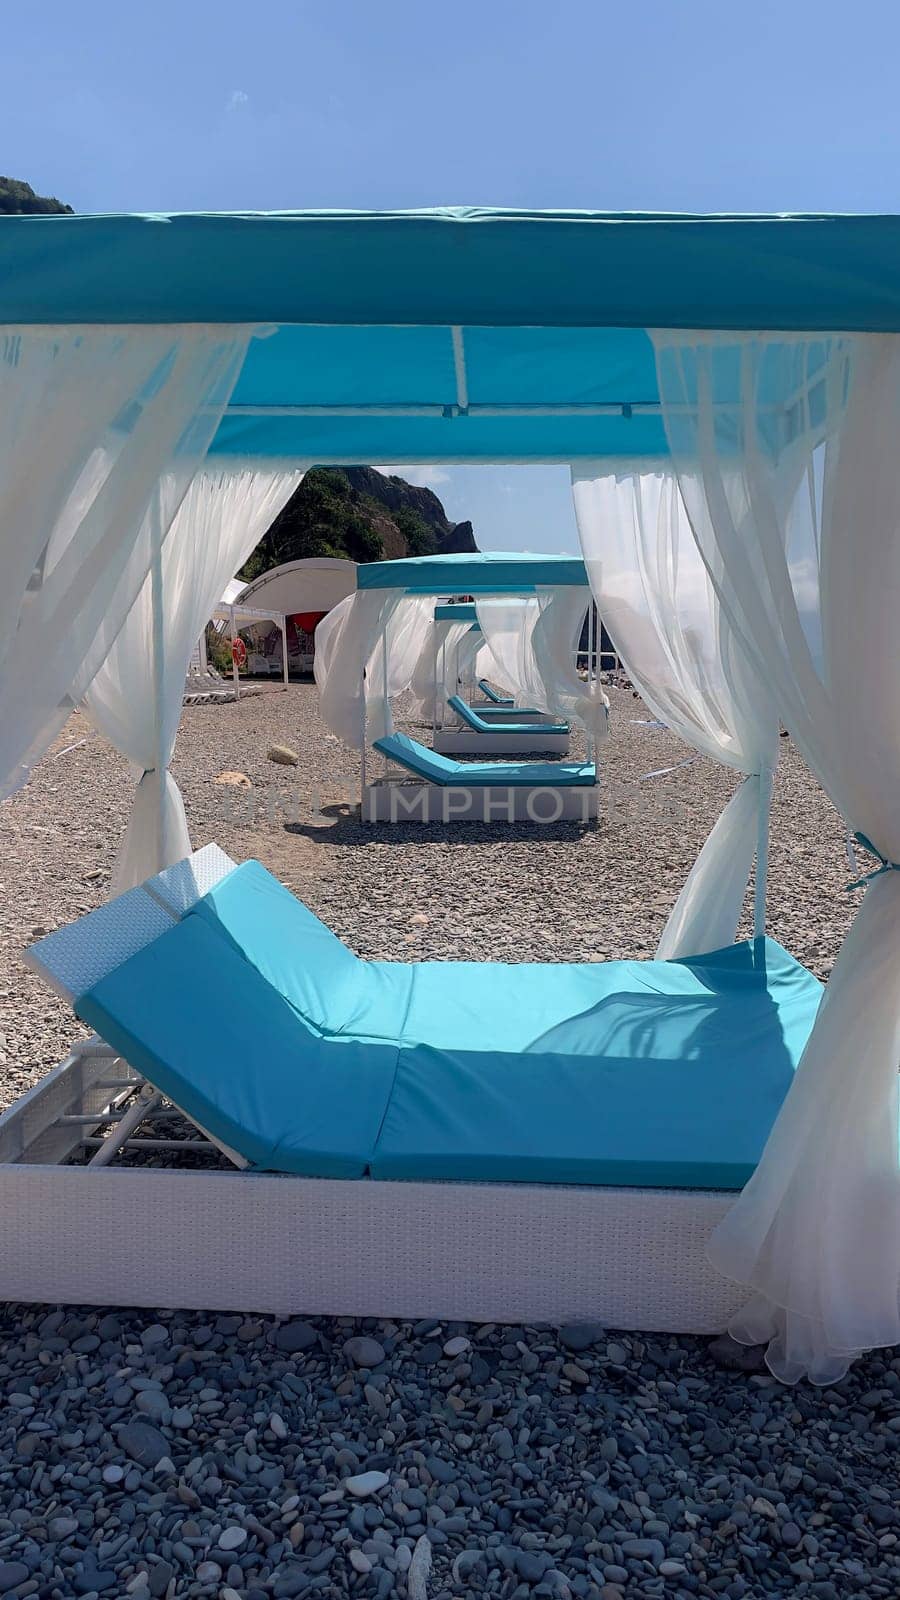 A blue and white beach umbrella with white curtains is set up on a beach. The umbrella is surrounded by several lounge chairs, creating a relaxing and inviting atmosphere